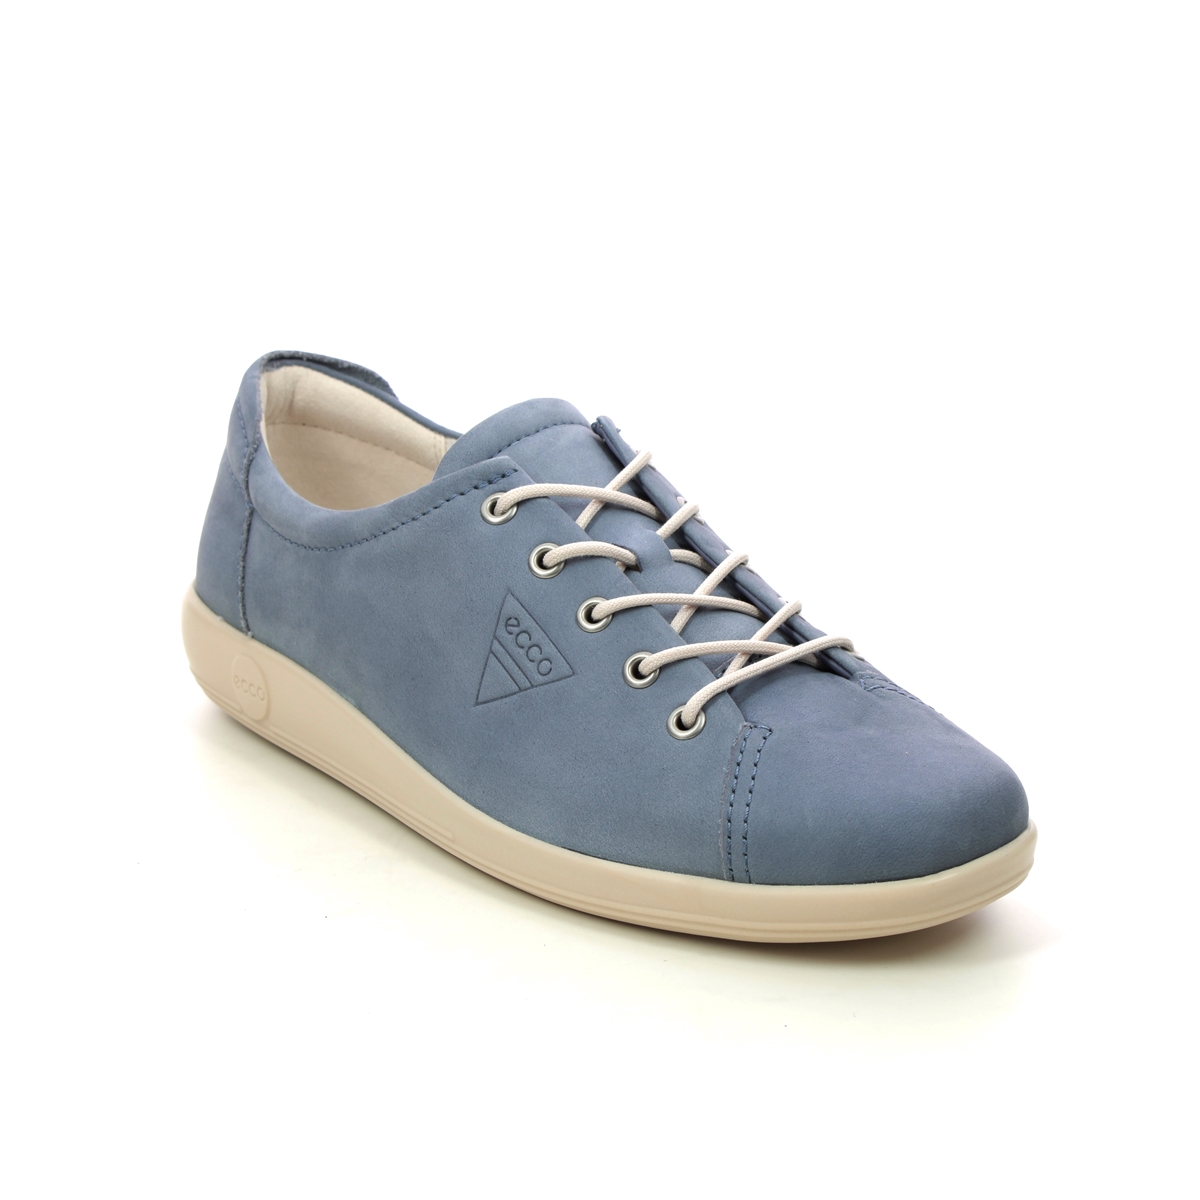 ECCO Soft 2.0 Denim Womens lacing shoes 206503-02646 in a Plain Leather in Size 38